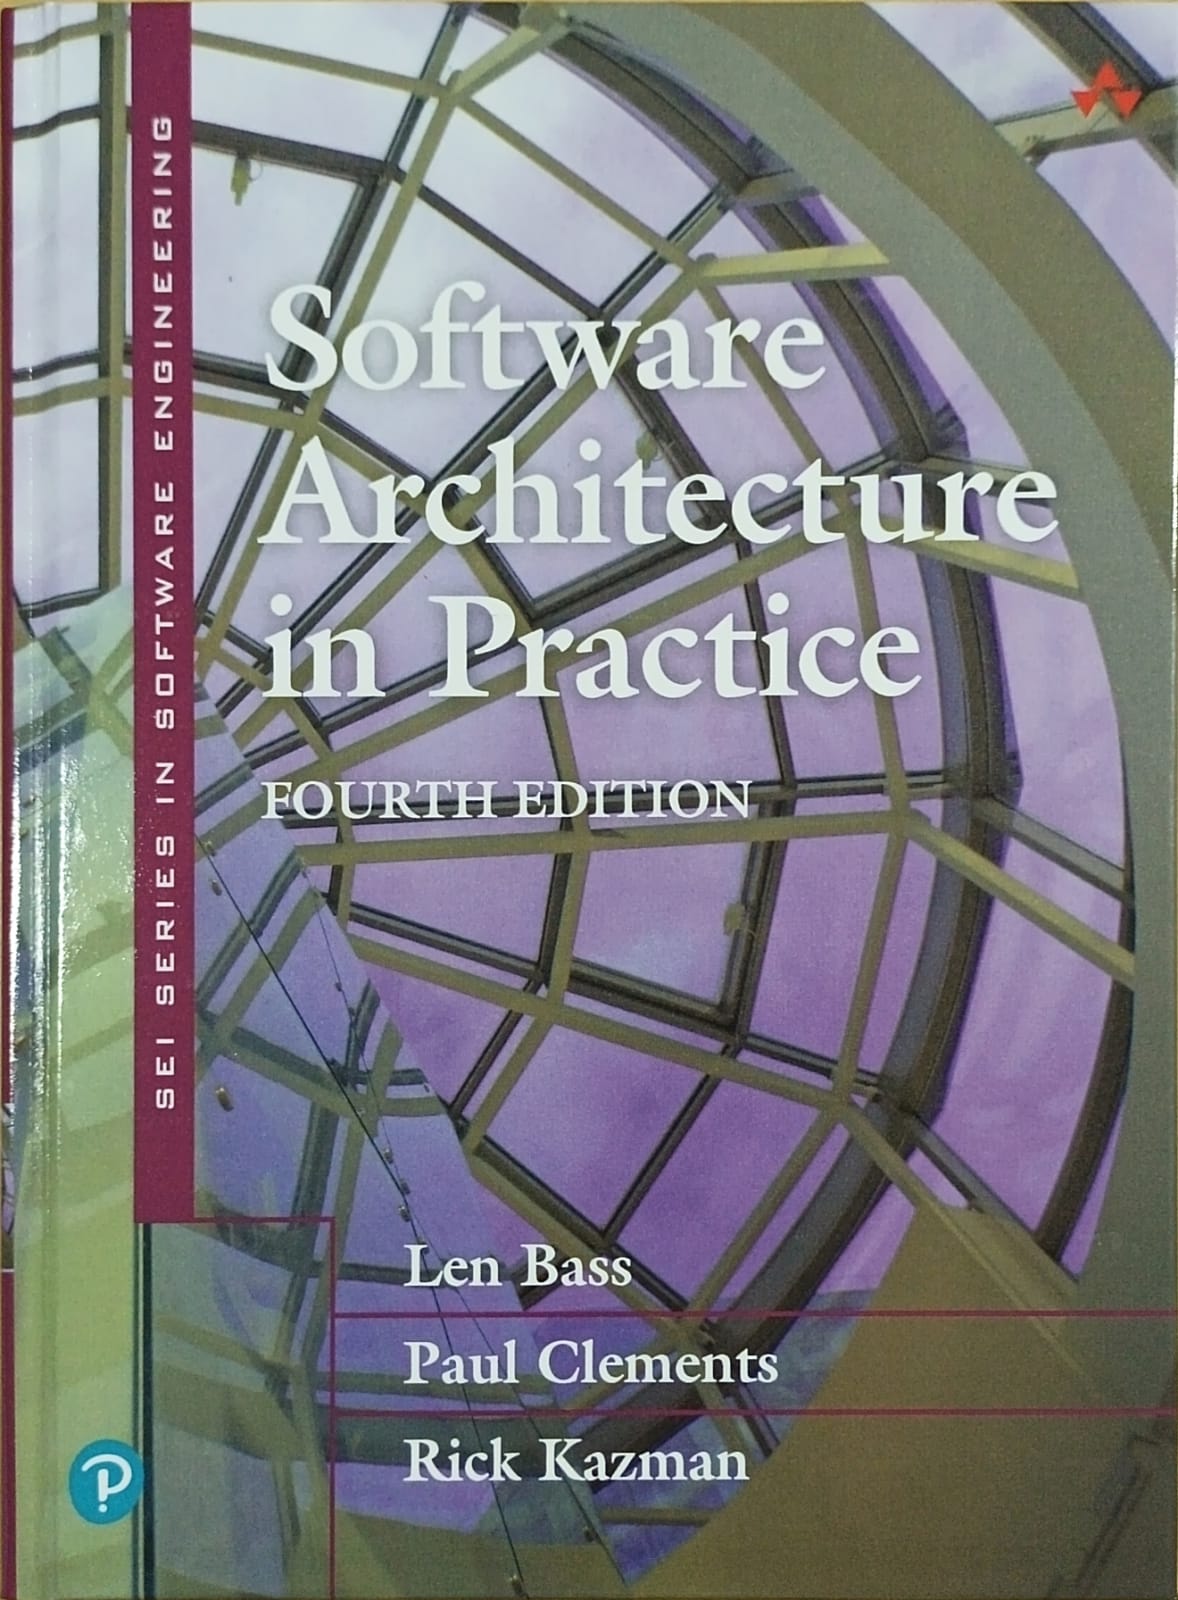 Software architecture in practice 4th edition